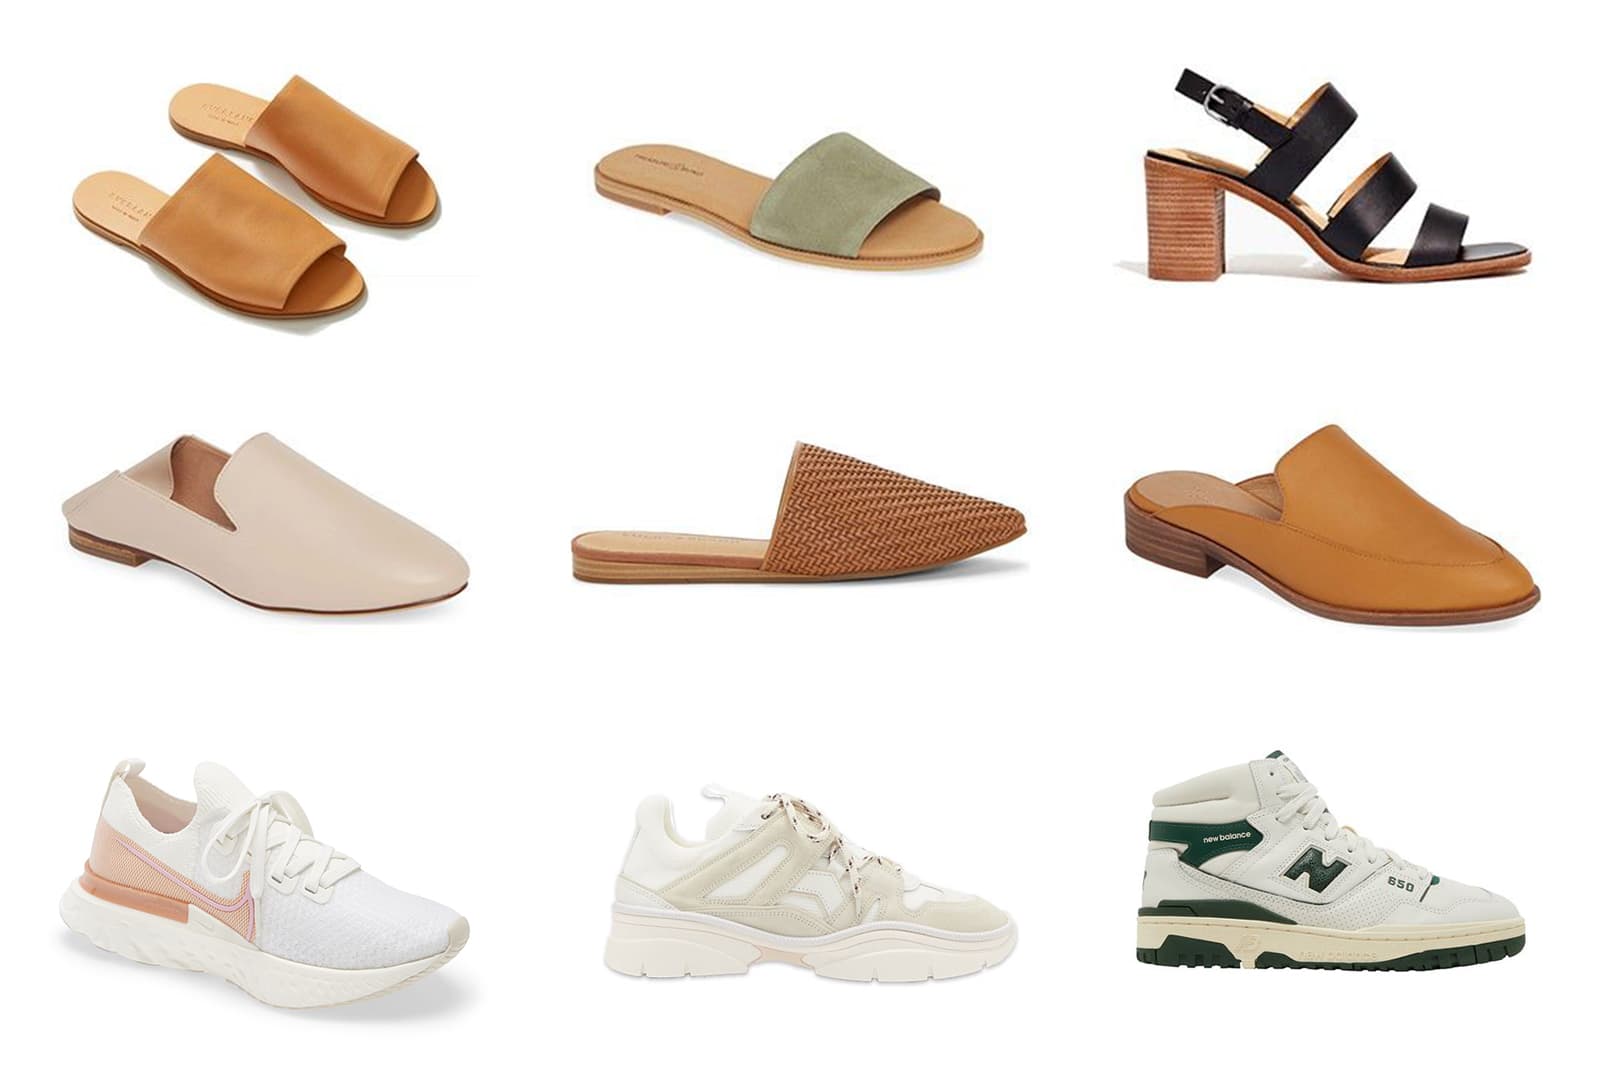 What kind of shoes to wear in summer? The evolution of shoes